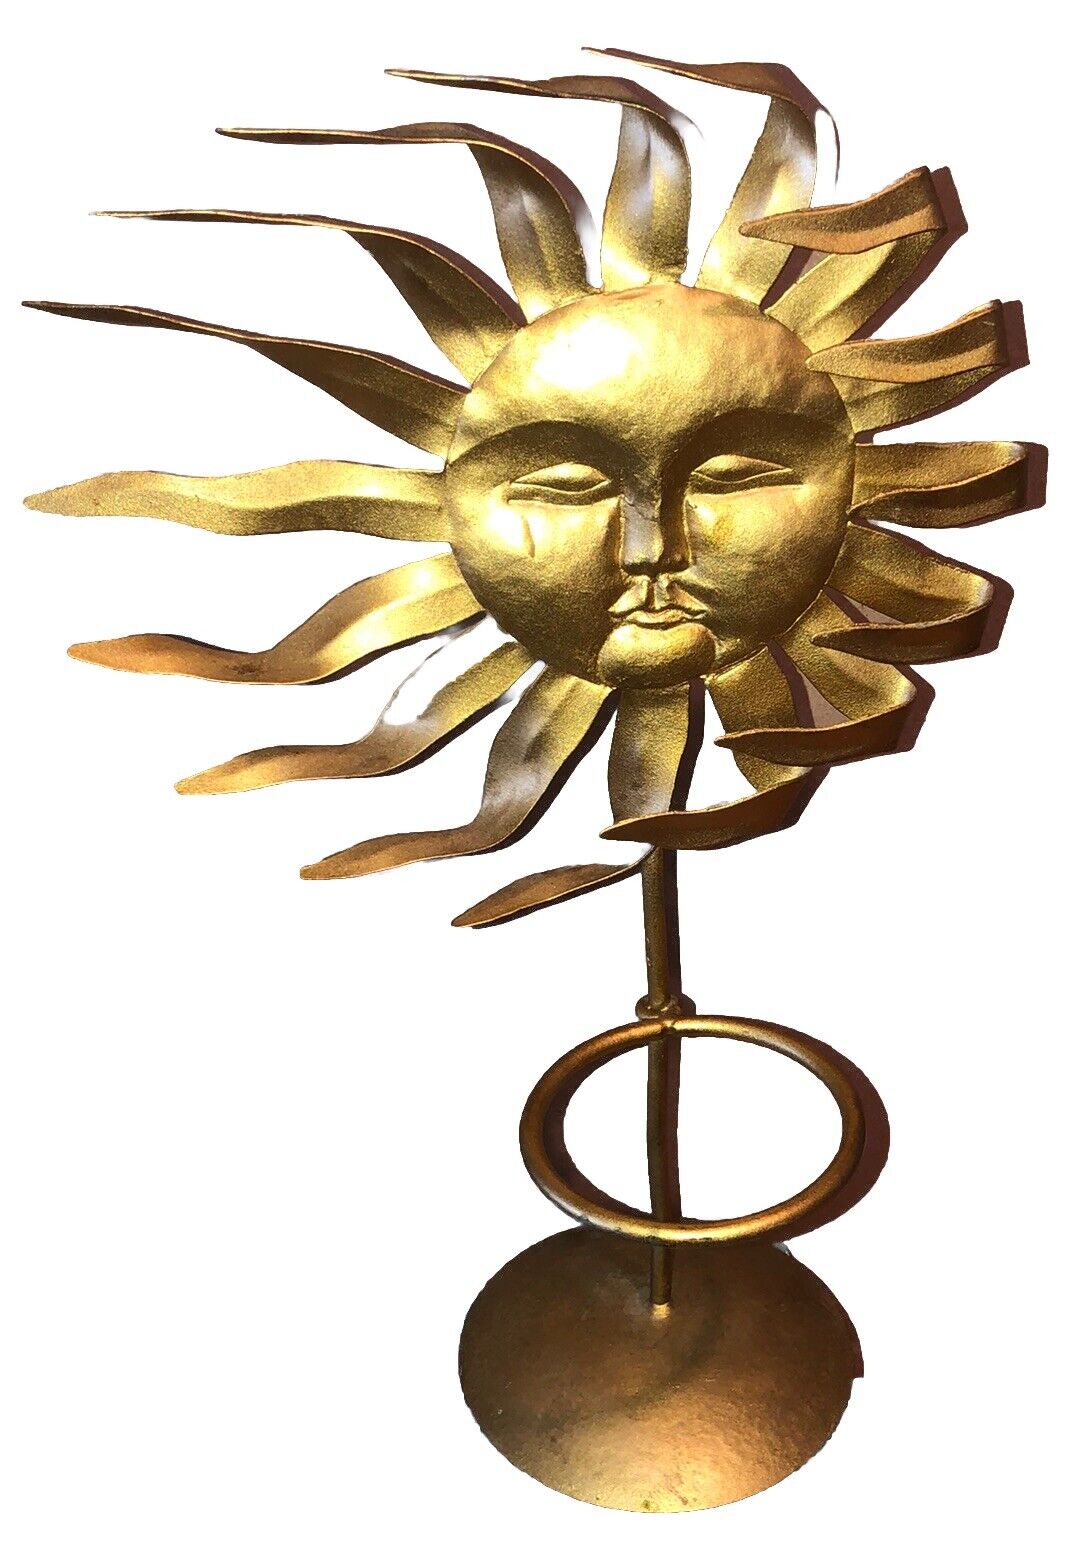 Fantastic Metal Gold 15 Inch Sun Candle Holder With Blown Hair Well Rays Lol ￼